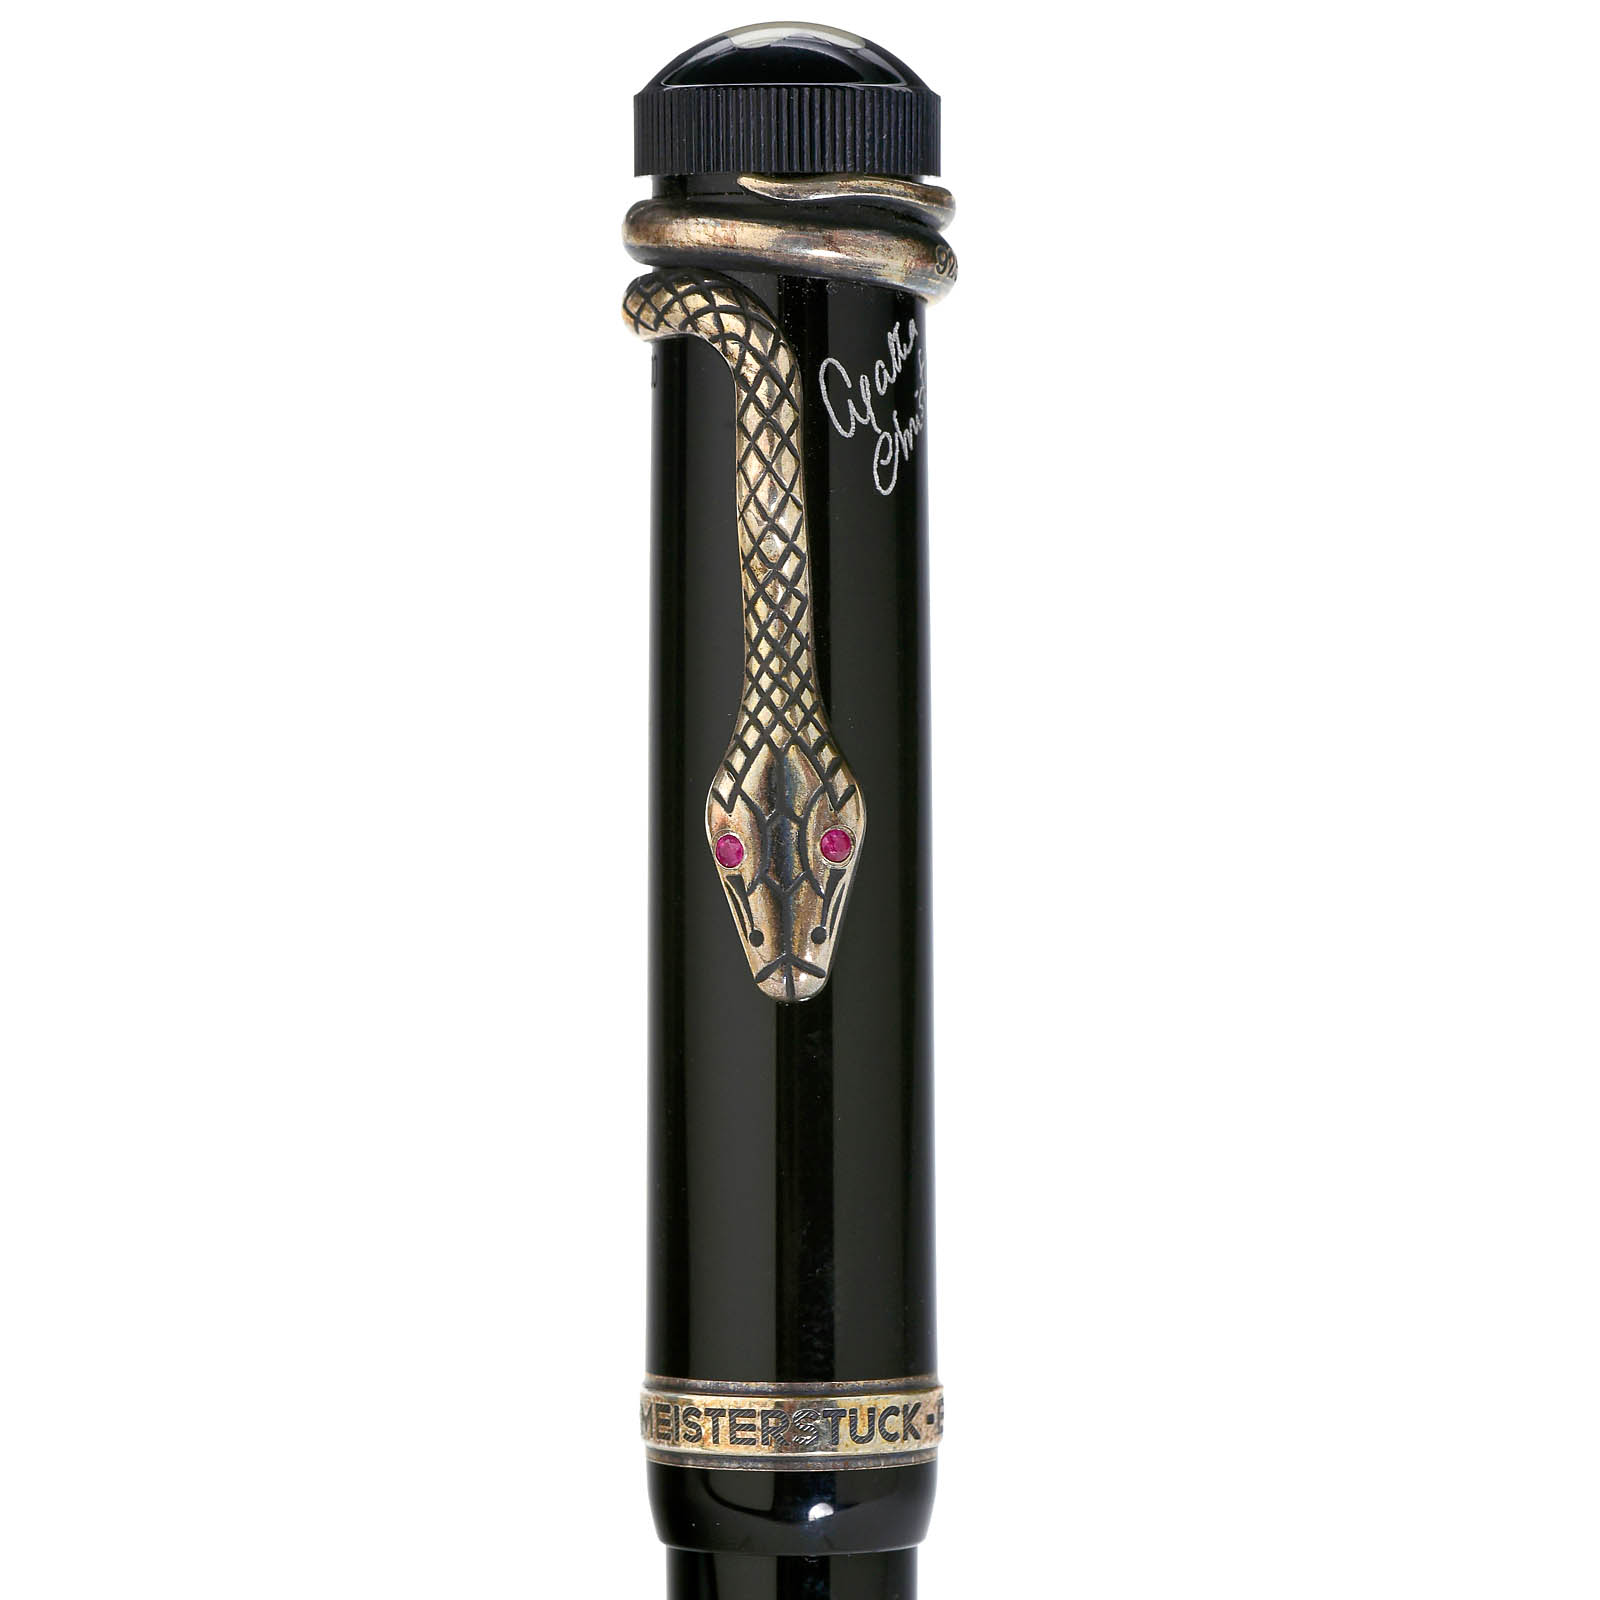 Montblanc "Agatha Christie" Ballpoint Pen, 1993
Limited Writers Edition, black resin body, - Image 3 of 3